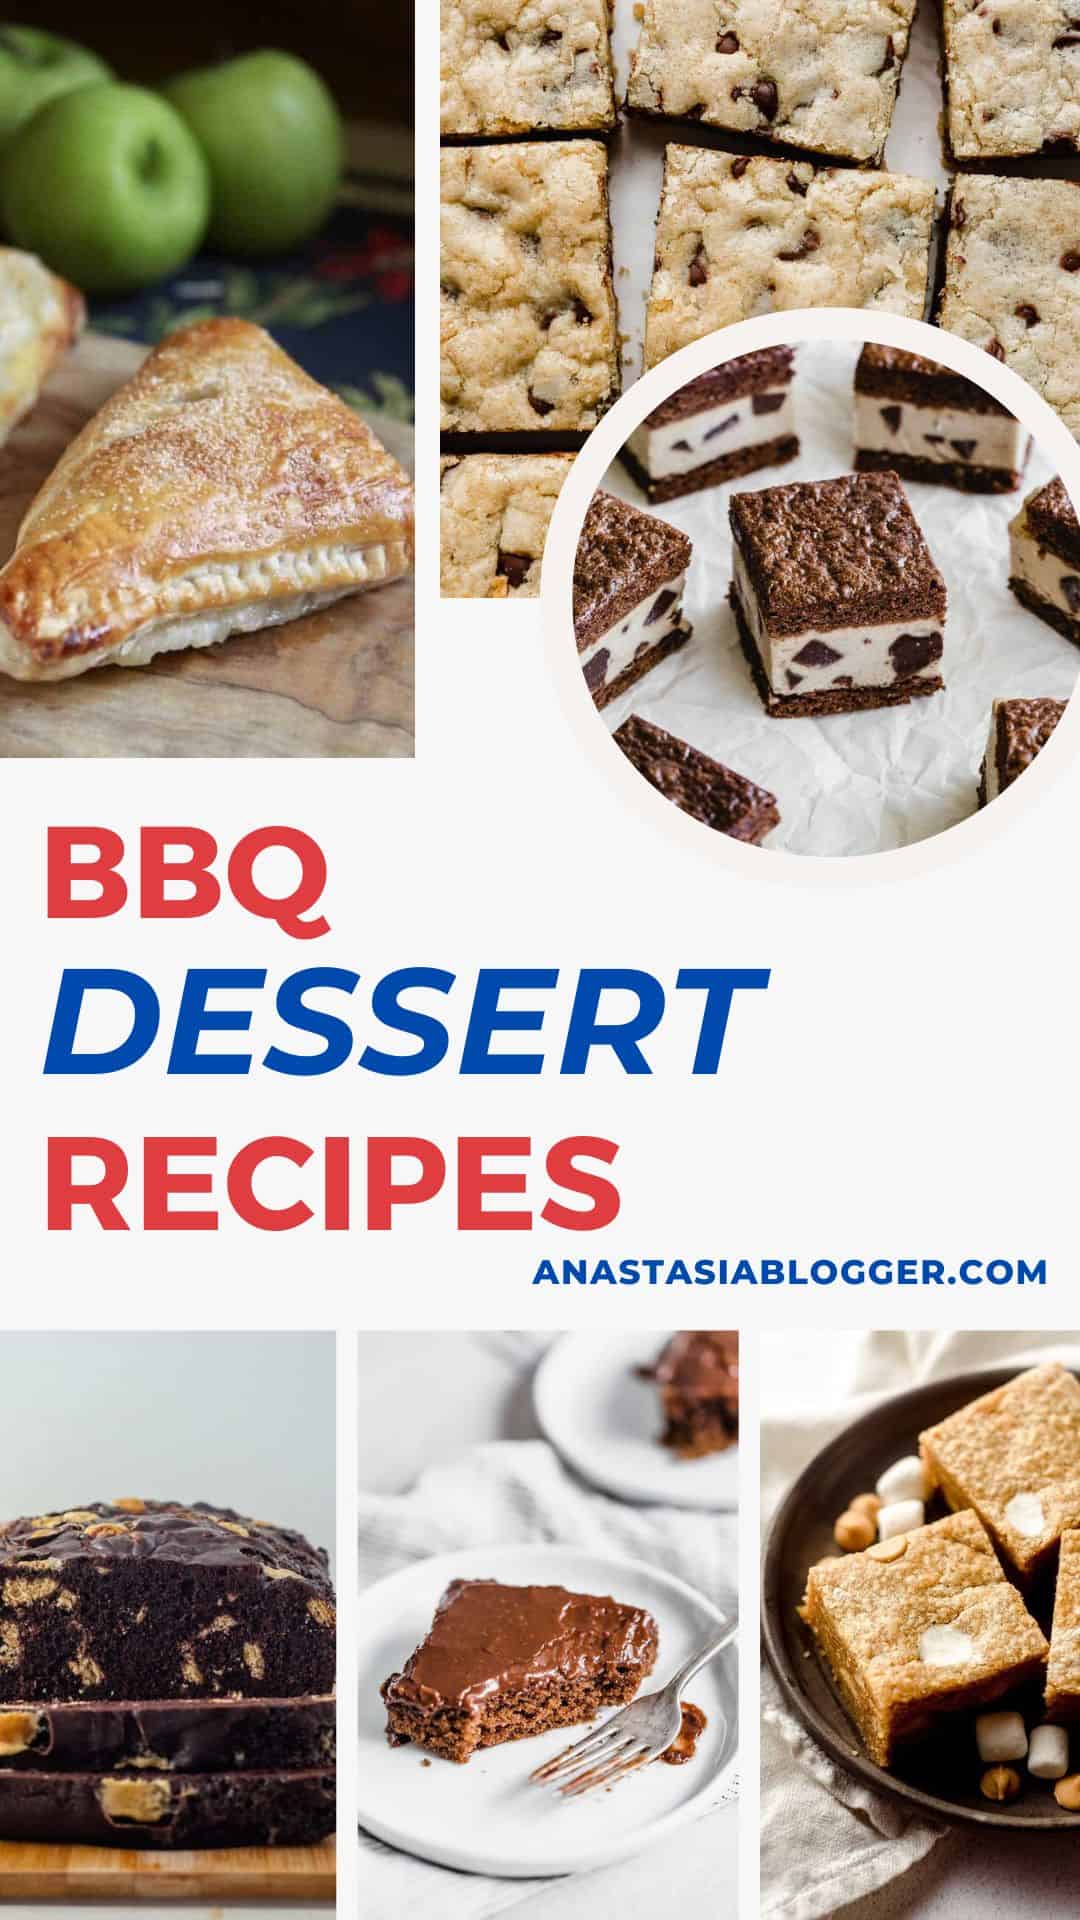 25 Desserts For A BBQ